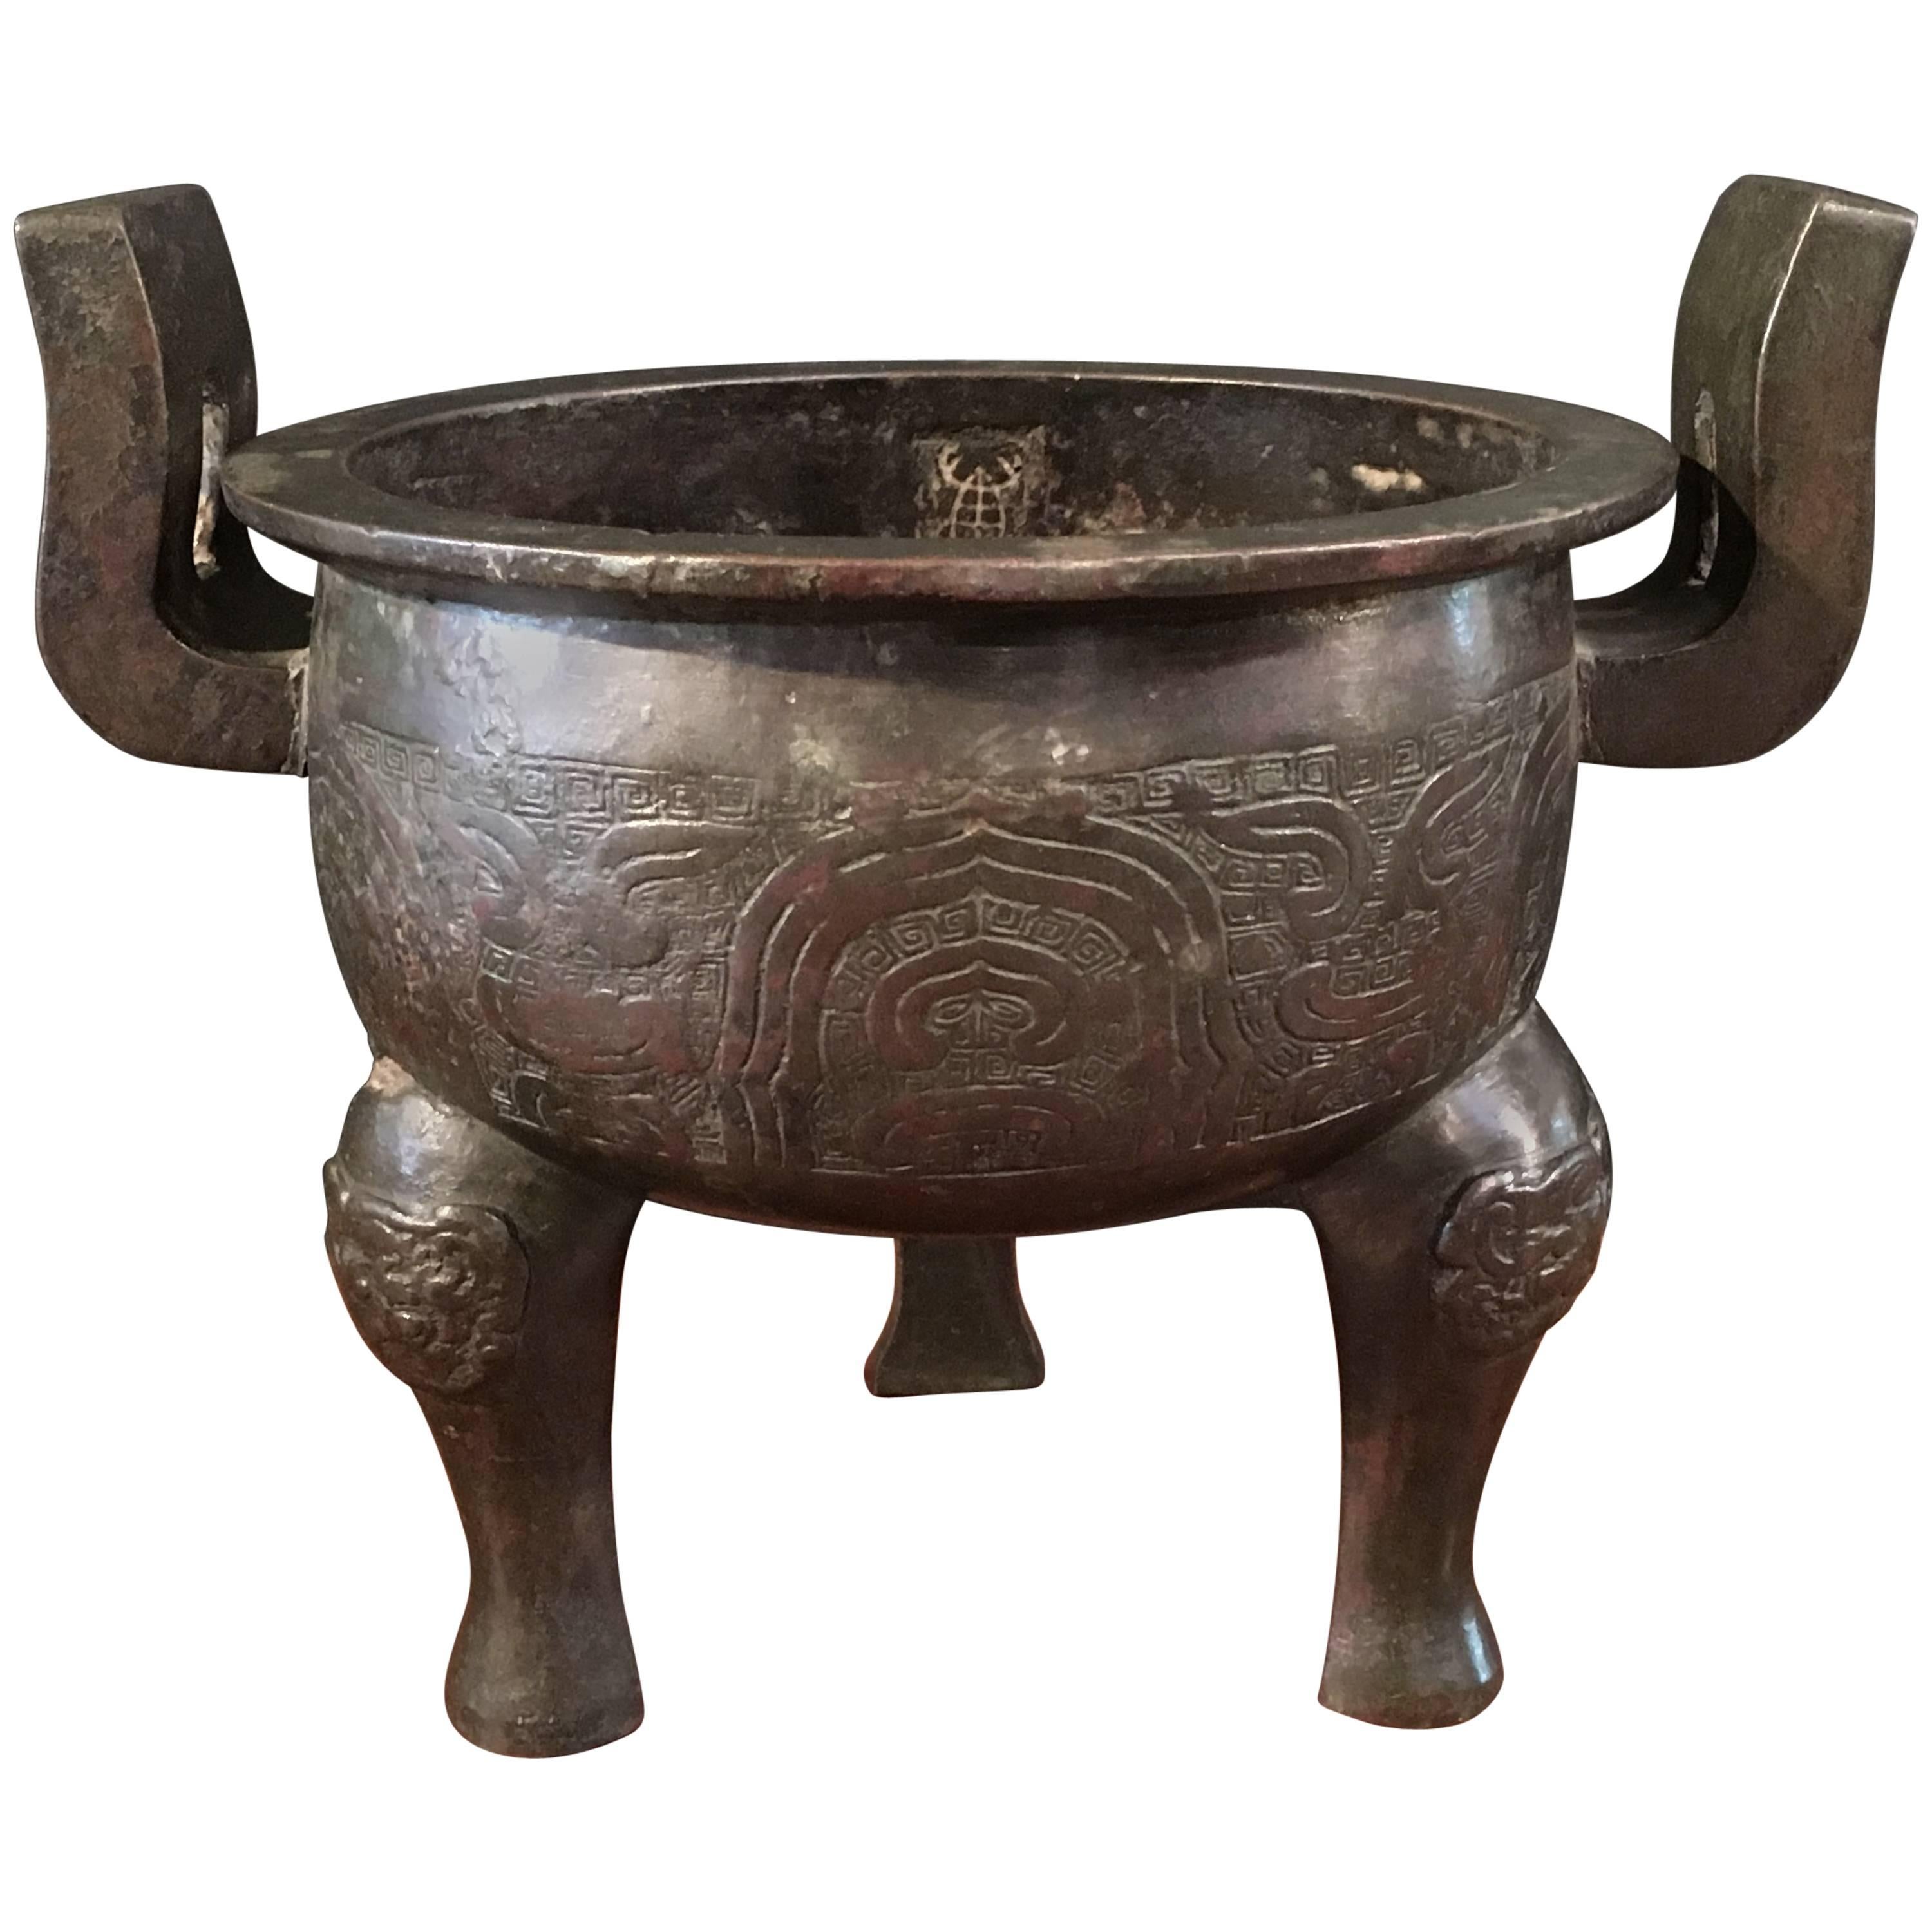 Early Ming Dynasty Archaistic Bronze Ding Vessel